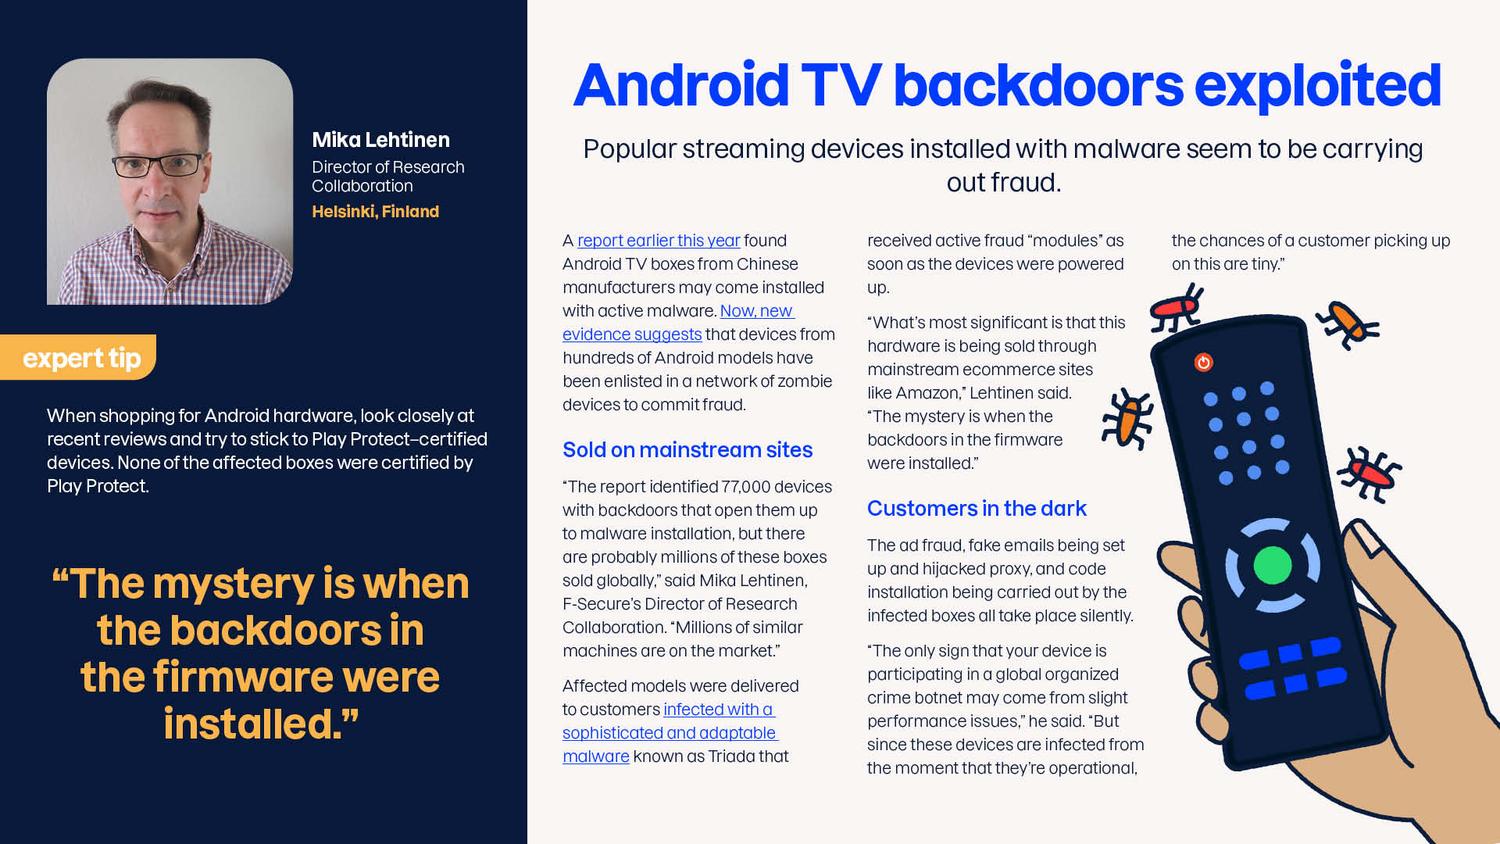 Android TV Boxes Infected with Backdoors, Compromising Home Networks